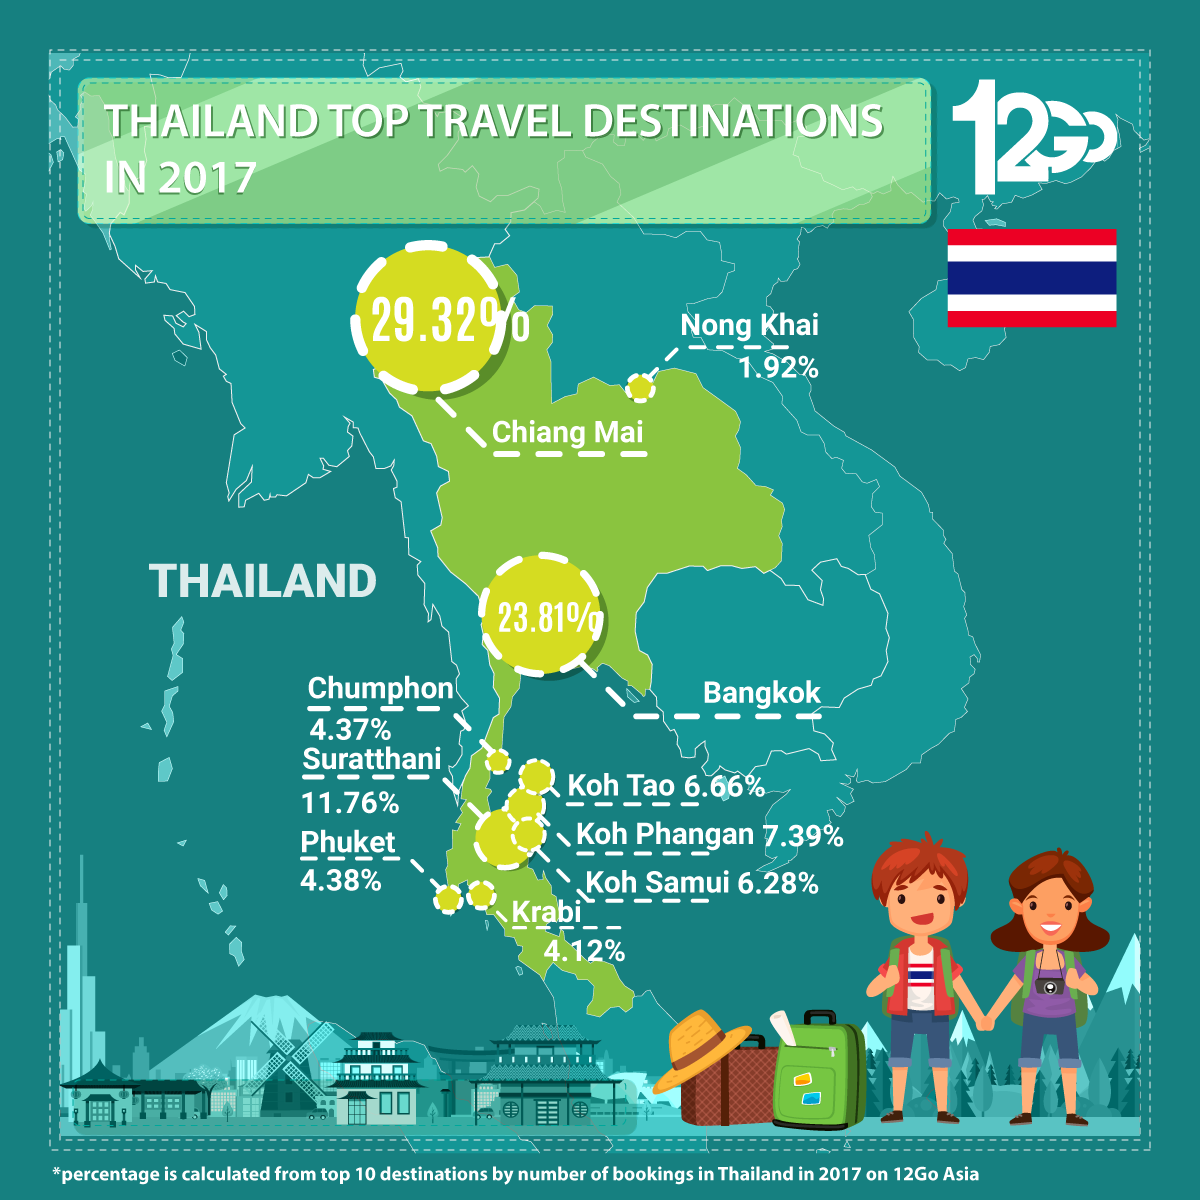 Thailand Top Travel Destinations in 2017 Infographic